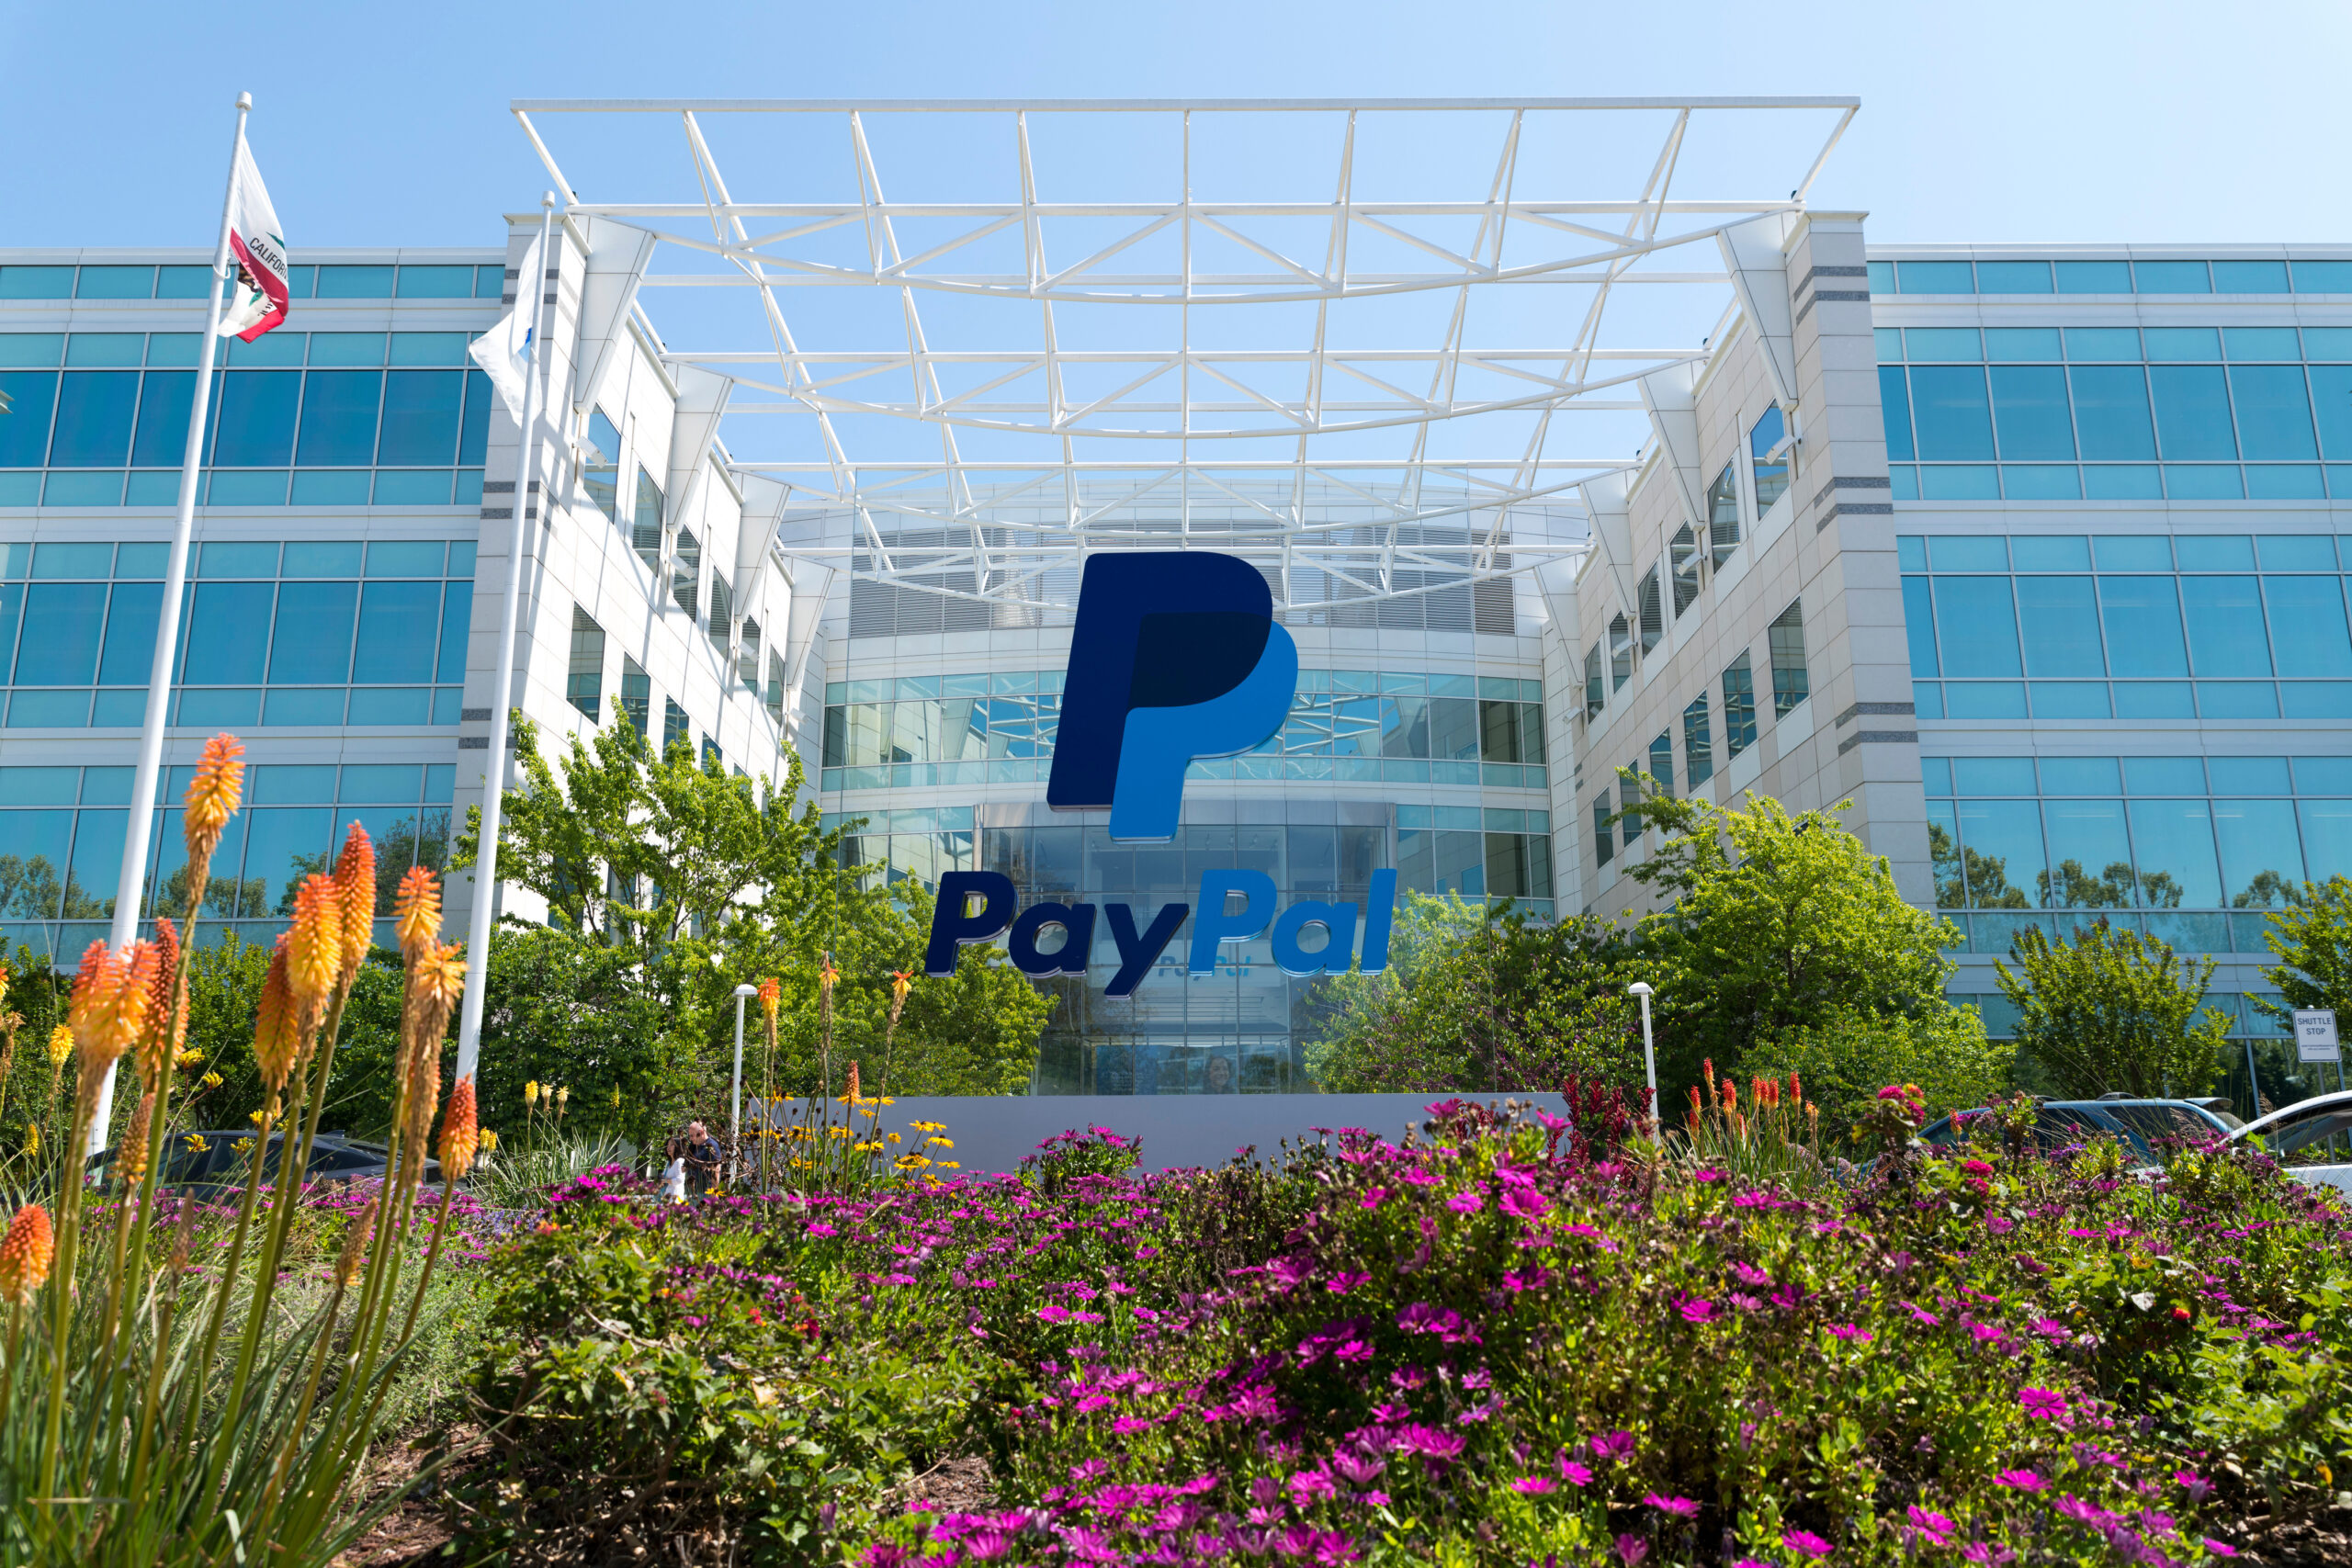 Exterior view of Paypal 's headquarters in Silicon Valley.